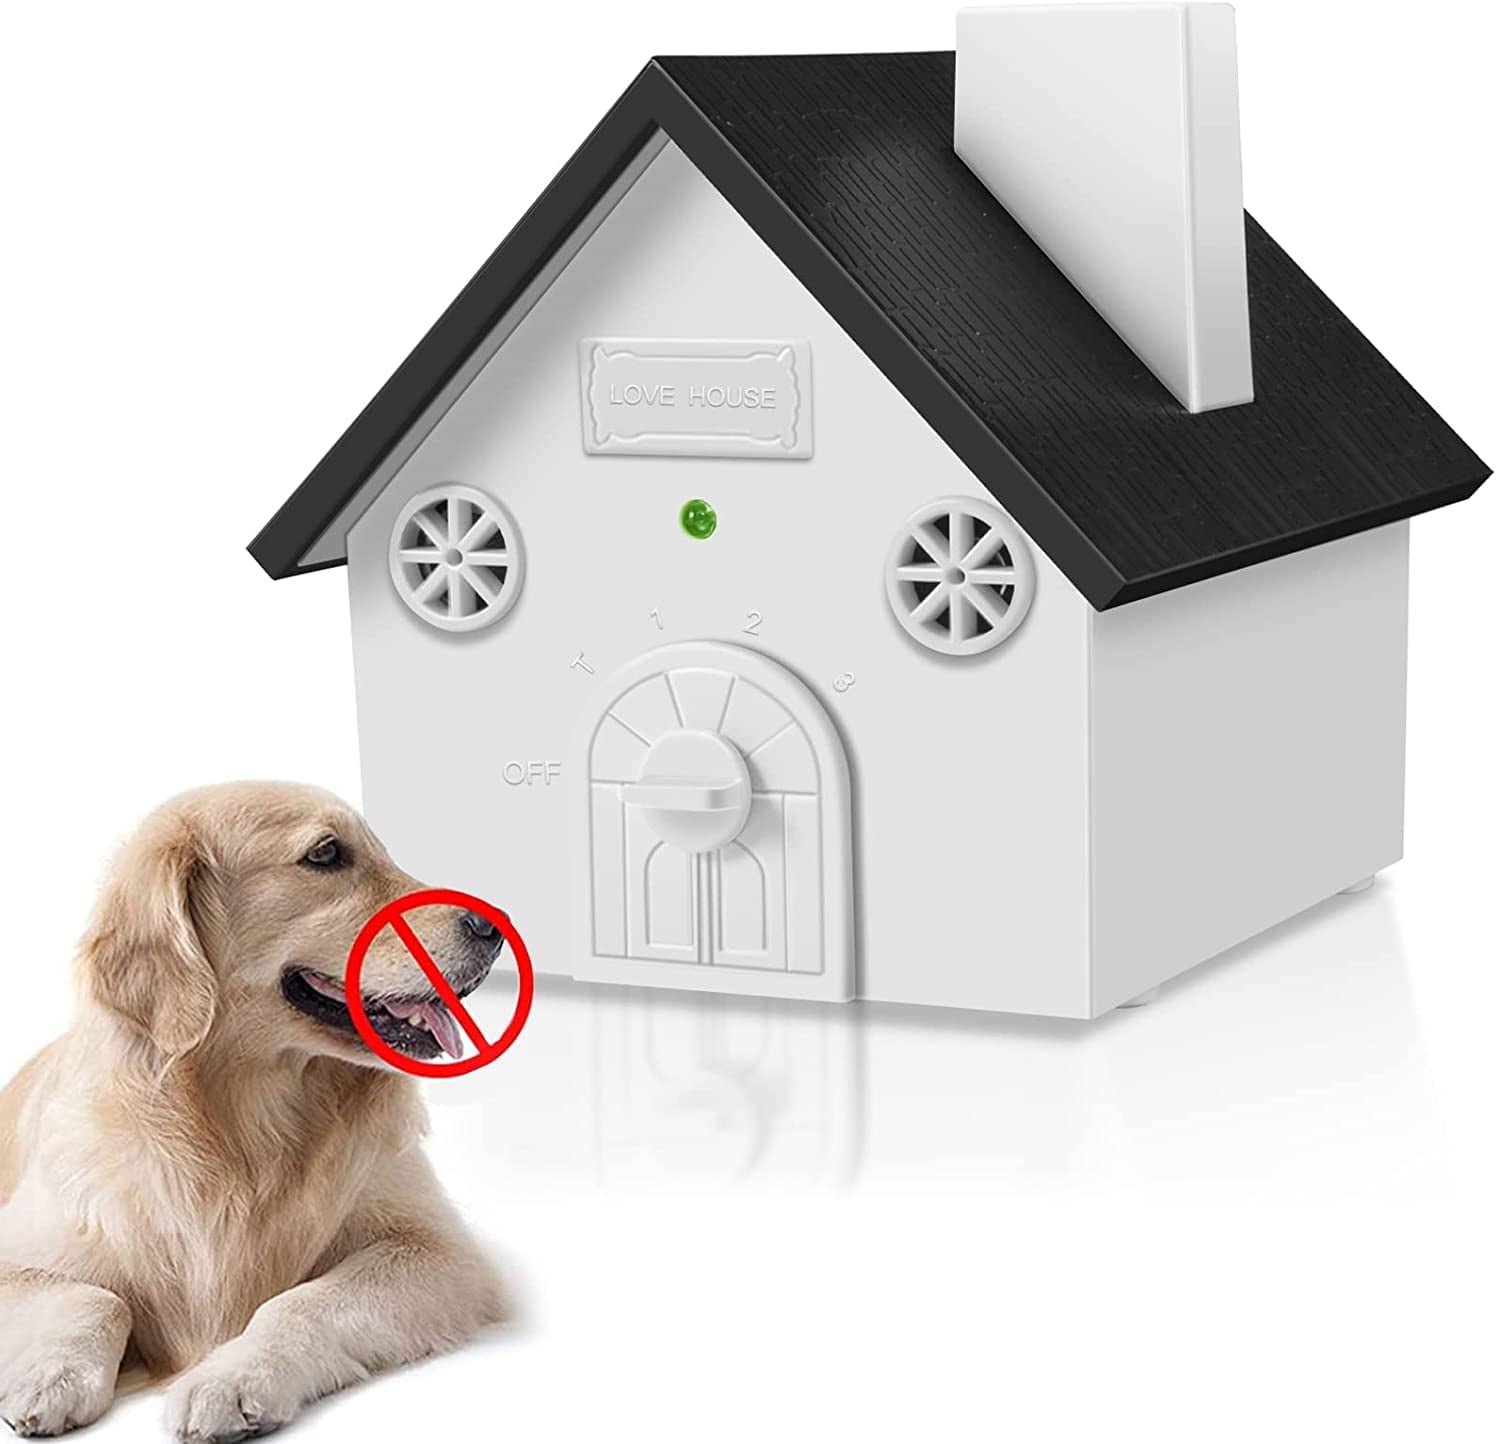 Anti Barking Device Ultrasonic Dog Bark Control Device for Outdoor Indoor Control Range Up to 50 Ft Dog Sonic Bark Deterrents 